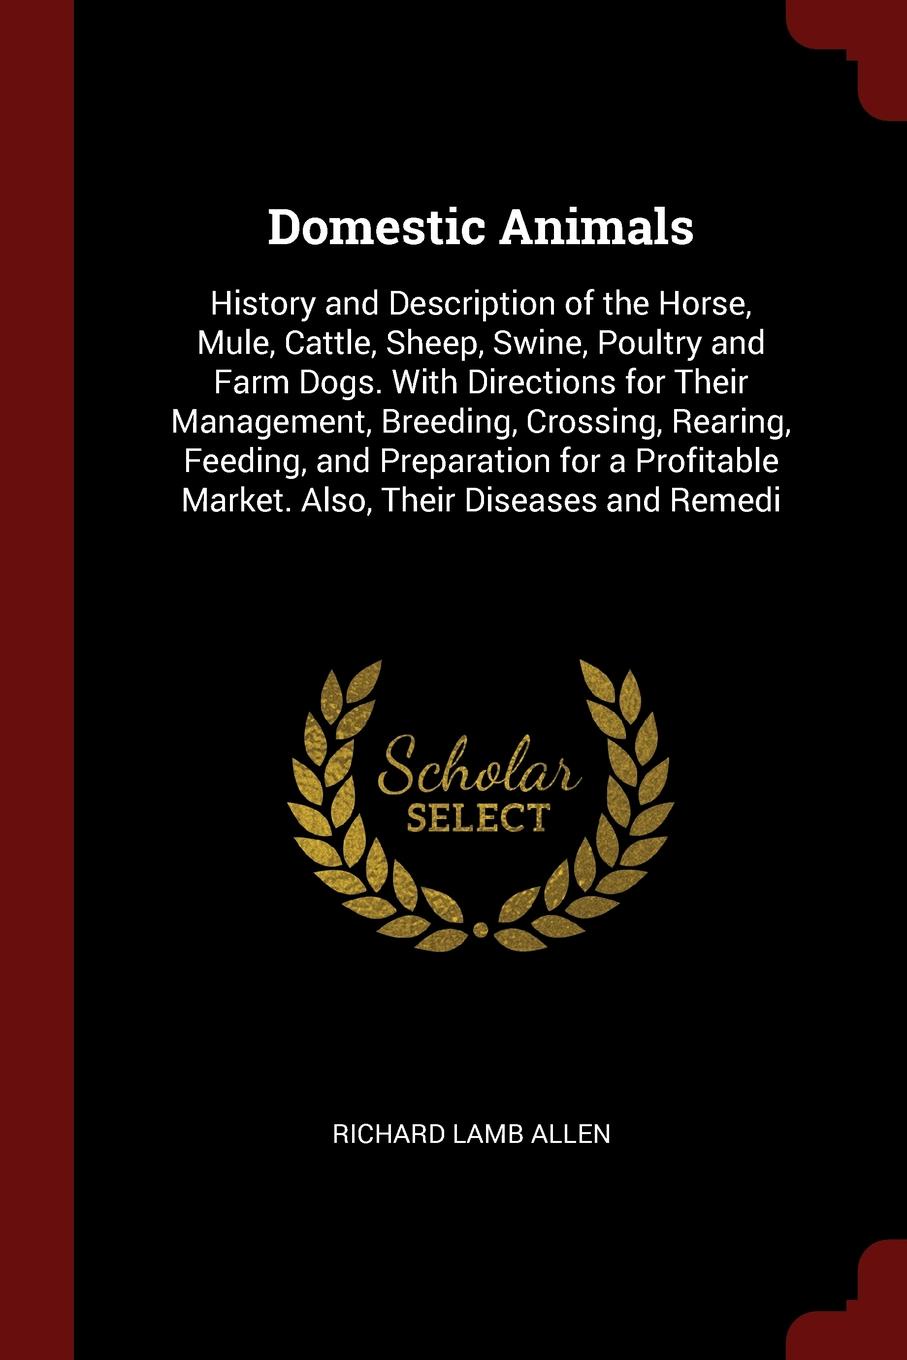 Domestic Animals. History and Description of the Horse, Mule, Cattle, Sheep, Swine, Poultry and Farm Dogs. With Directions for Their Management, Breeding, Crossing, Rearing, Feeding, and Preparation for a Profitable Market. Also, Their Diseases an...